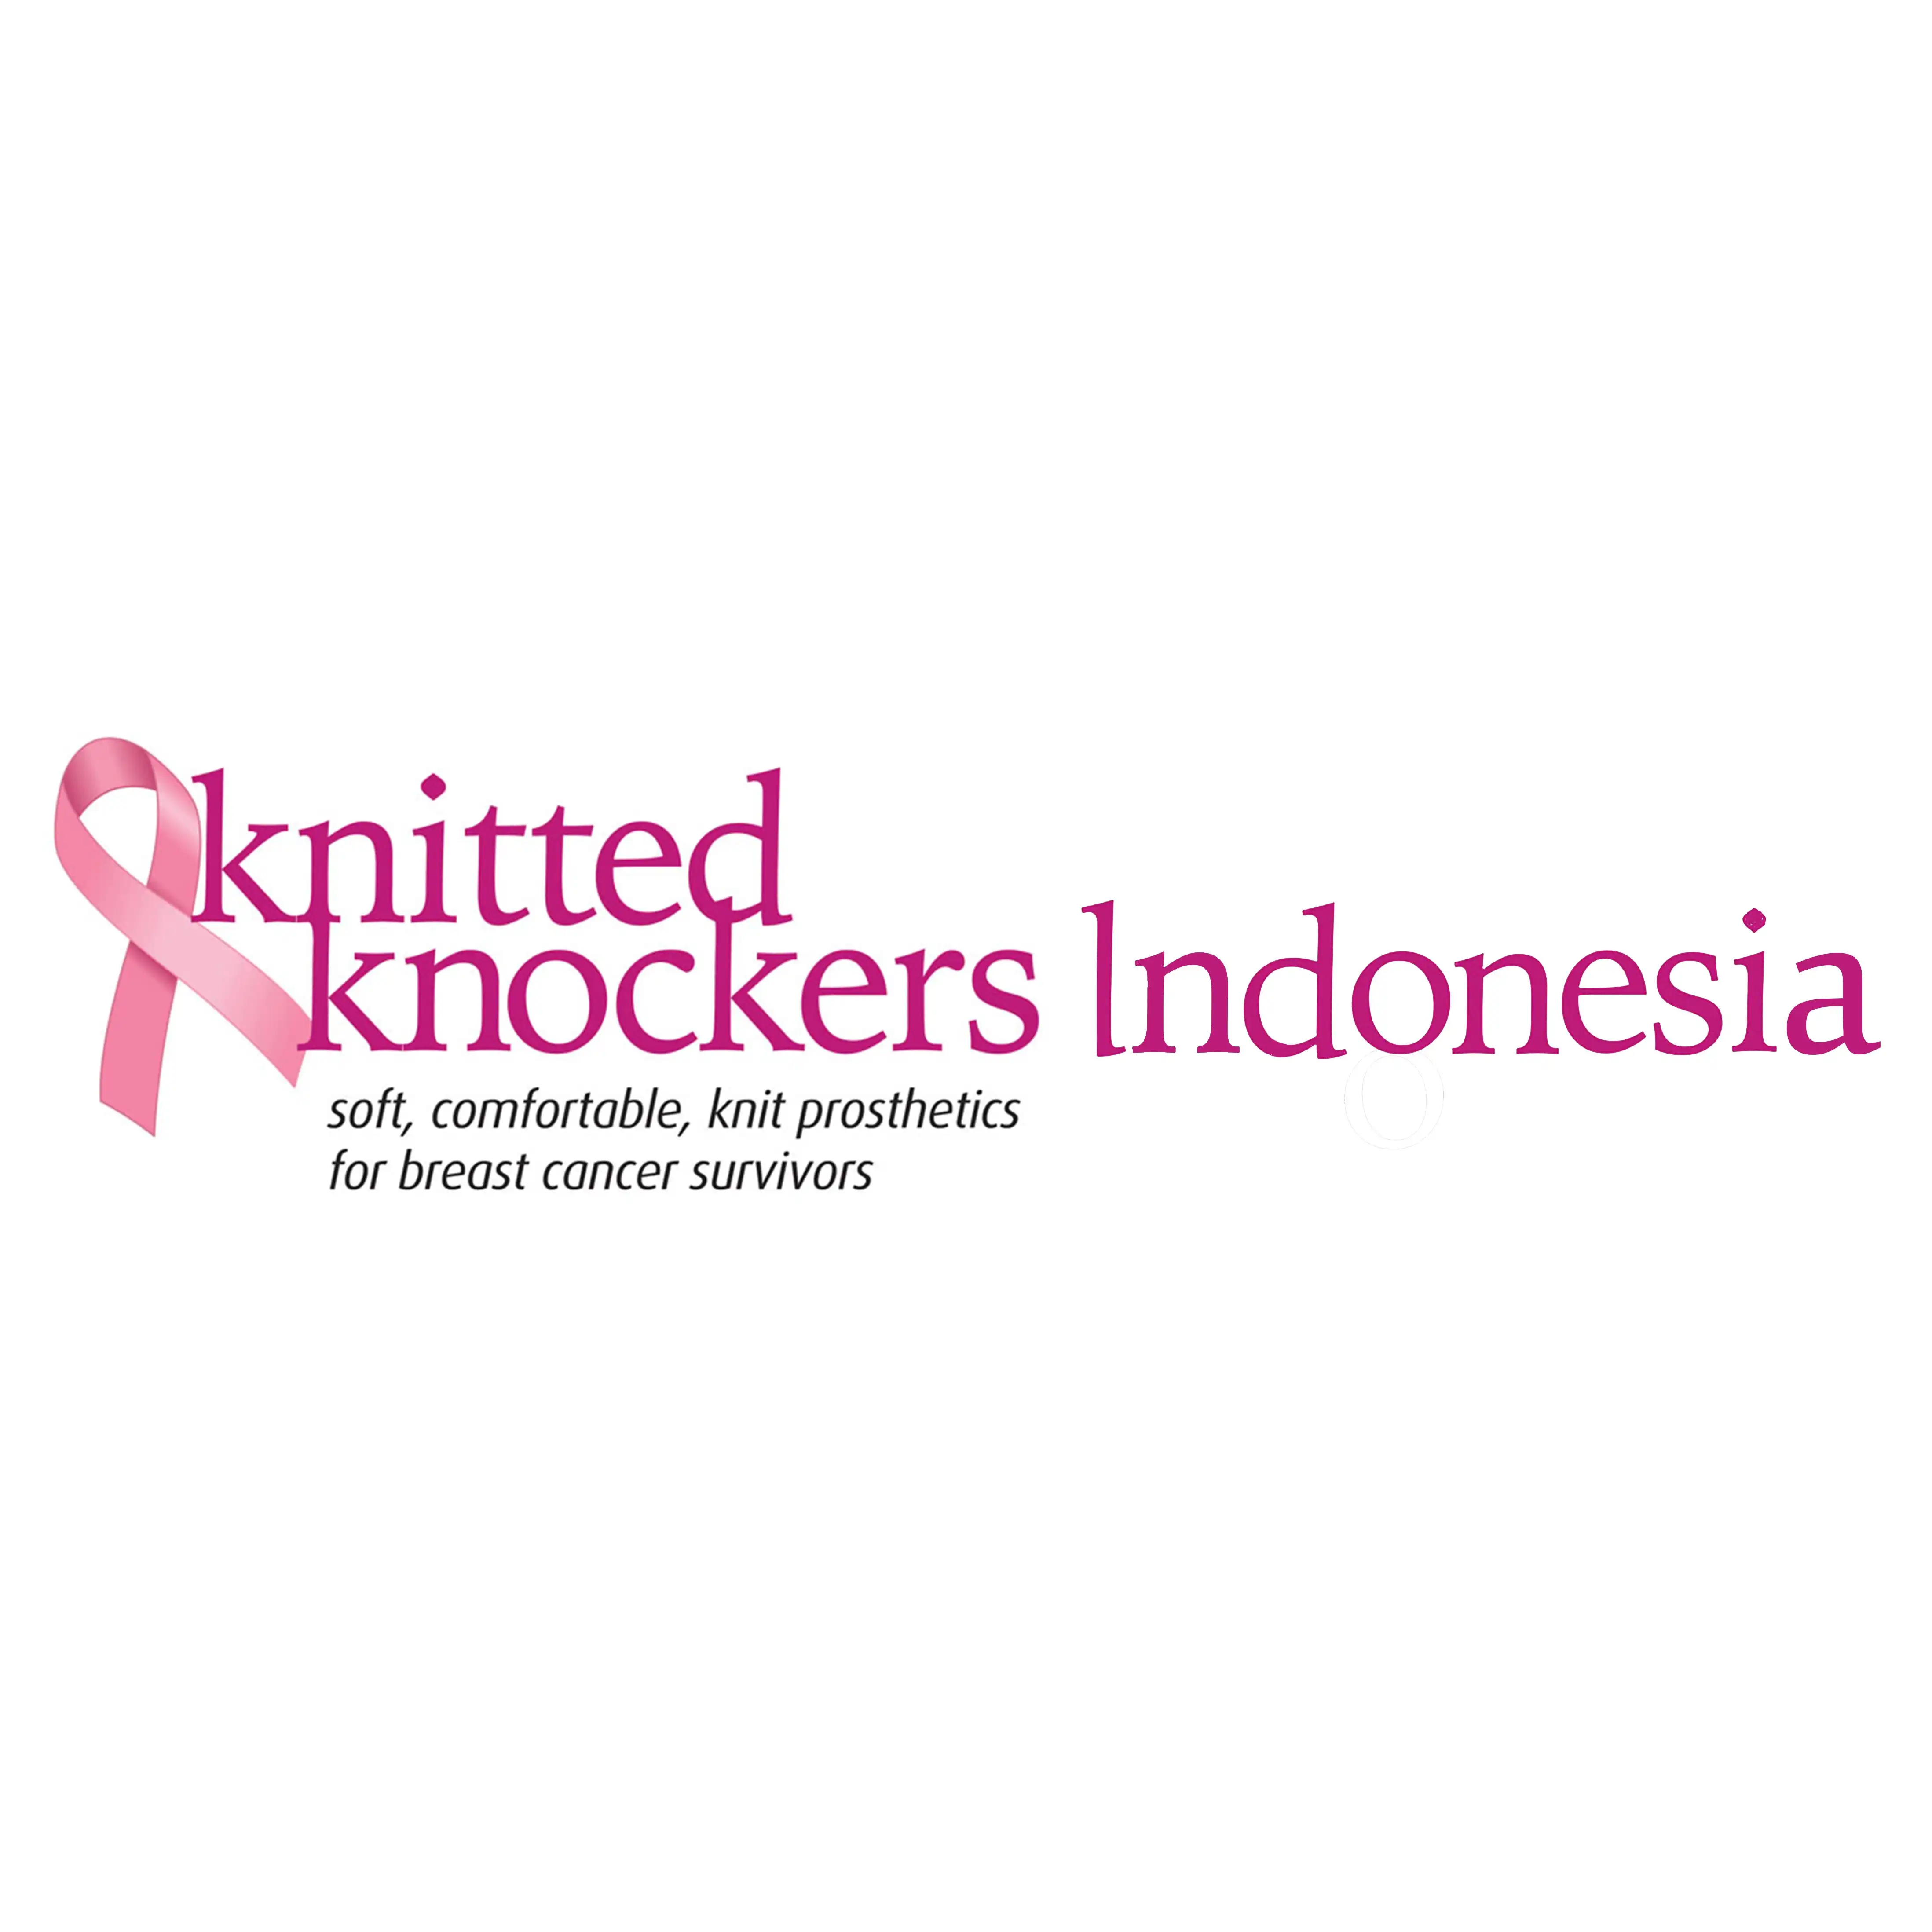 Knitted Knockers Indonesia